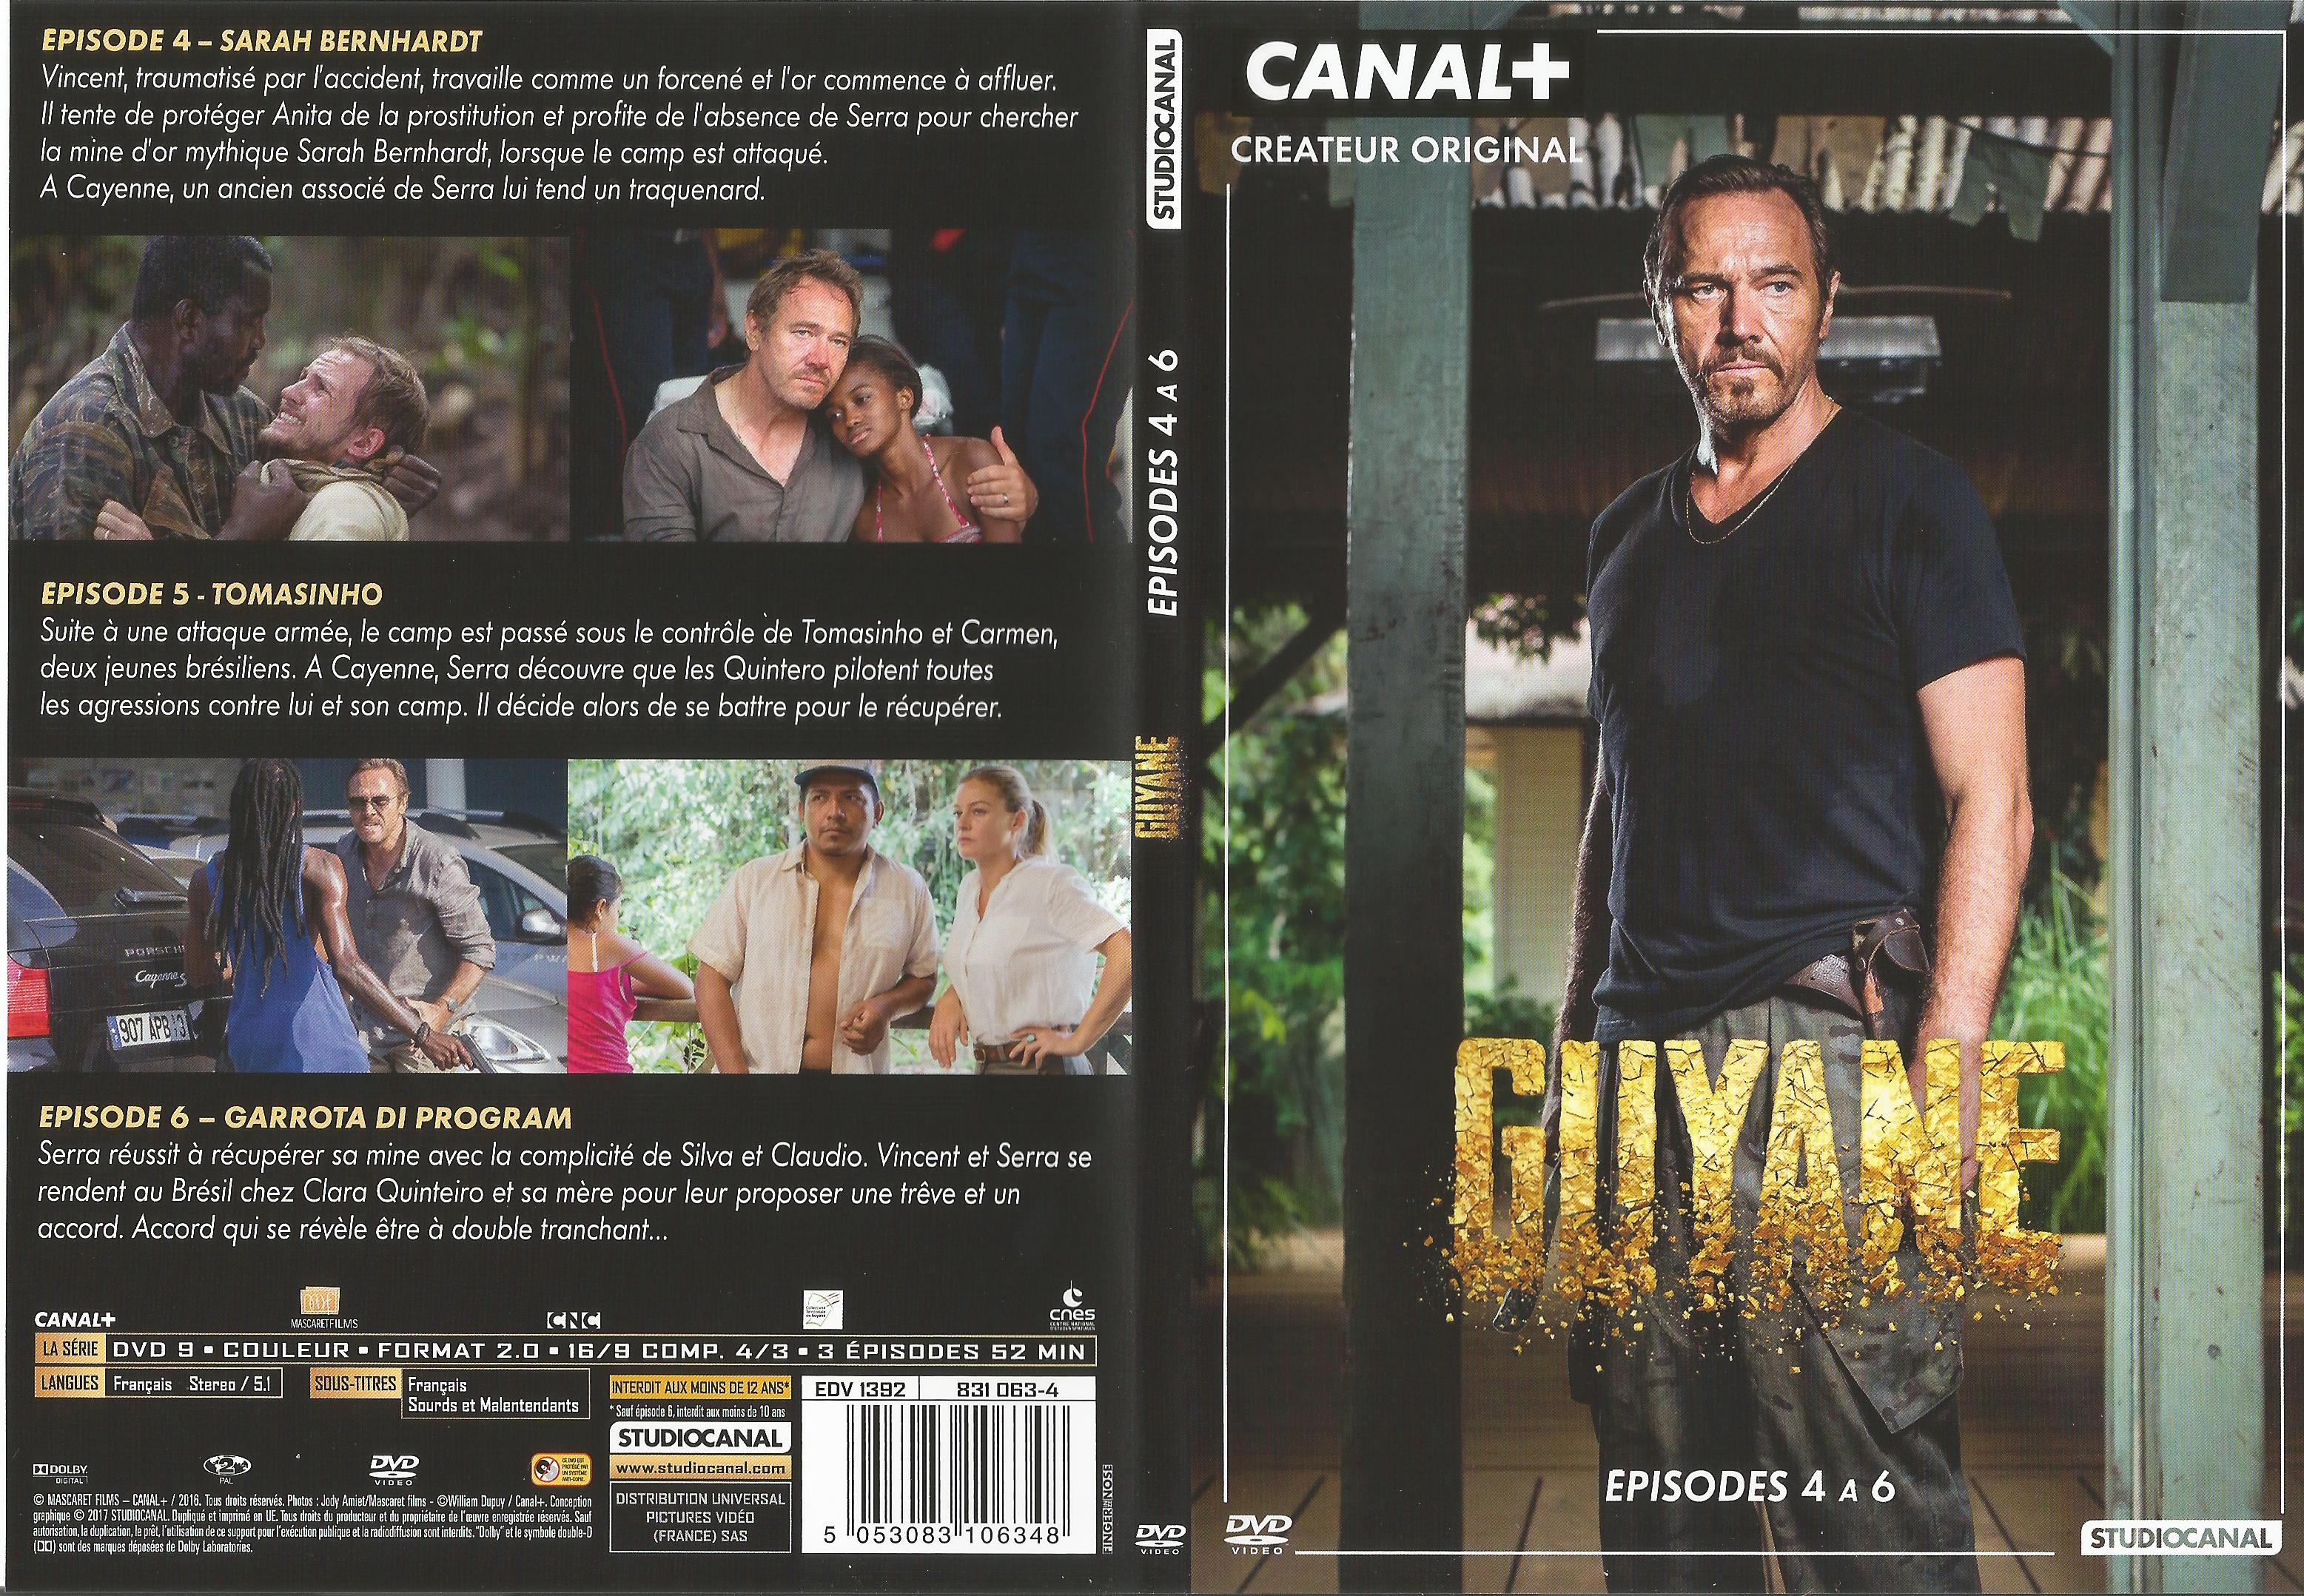 Jaquette DVD Guyane Ep 4-6